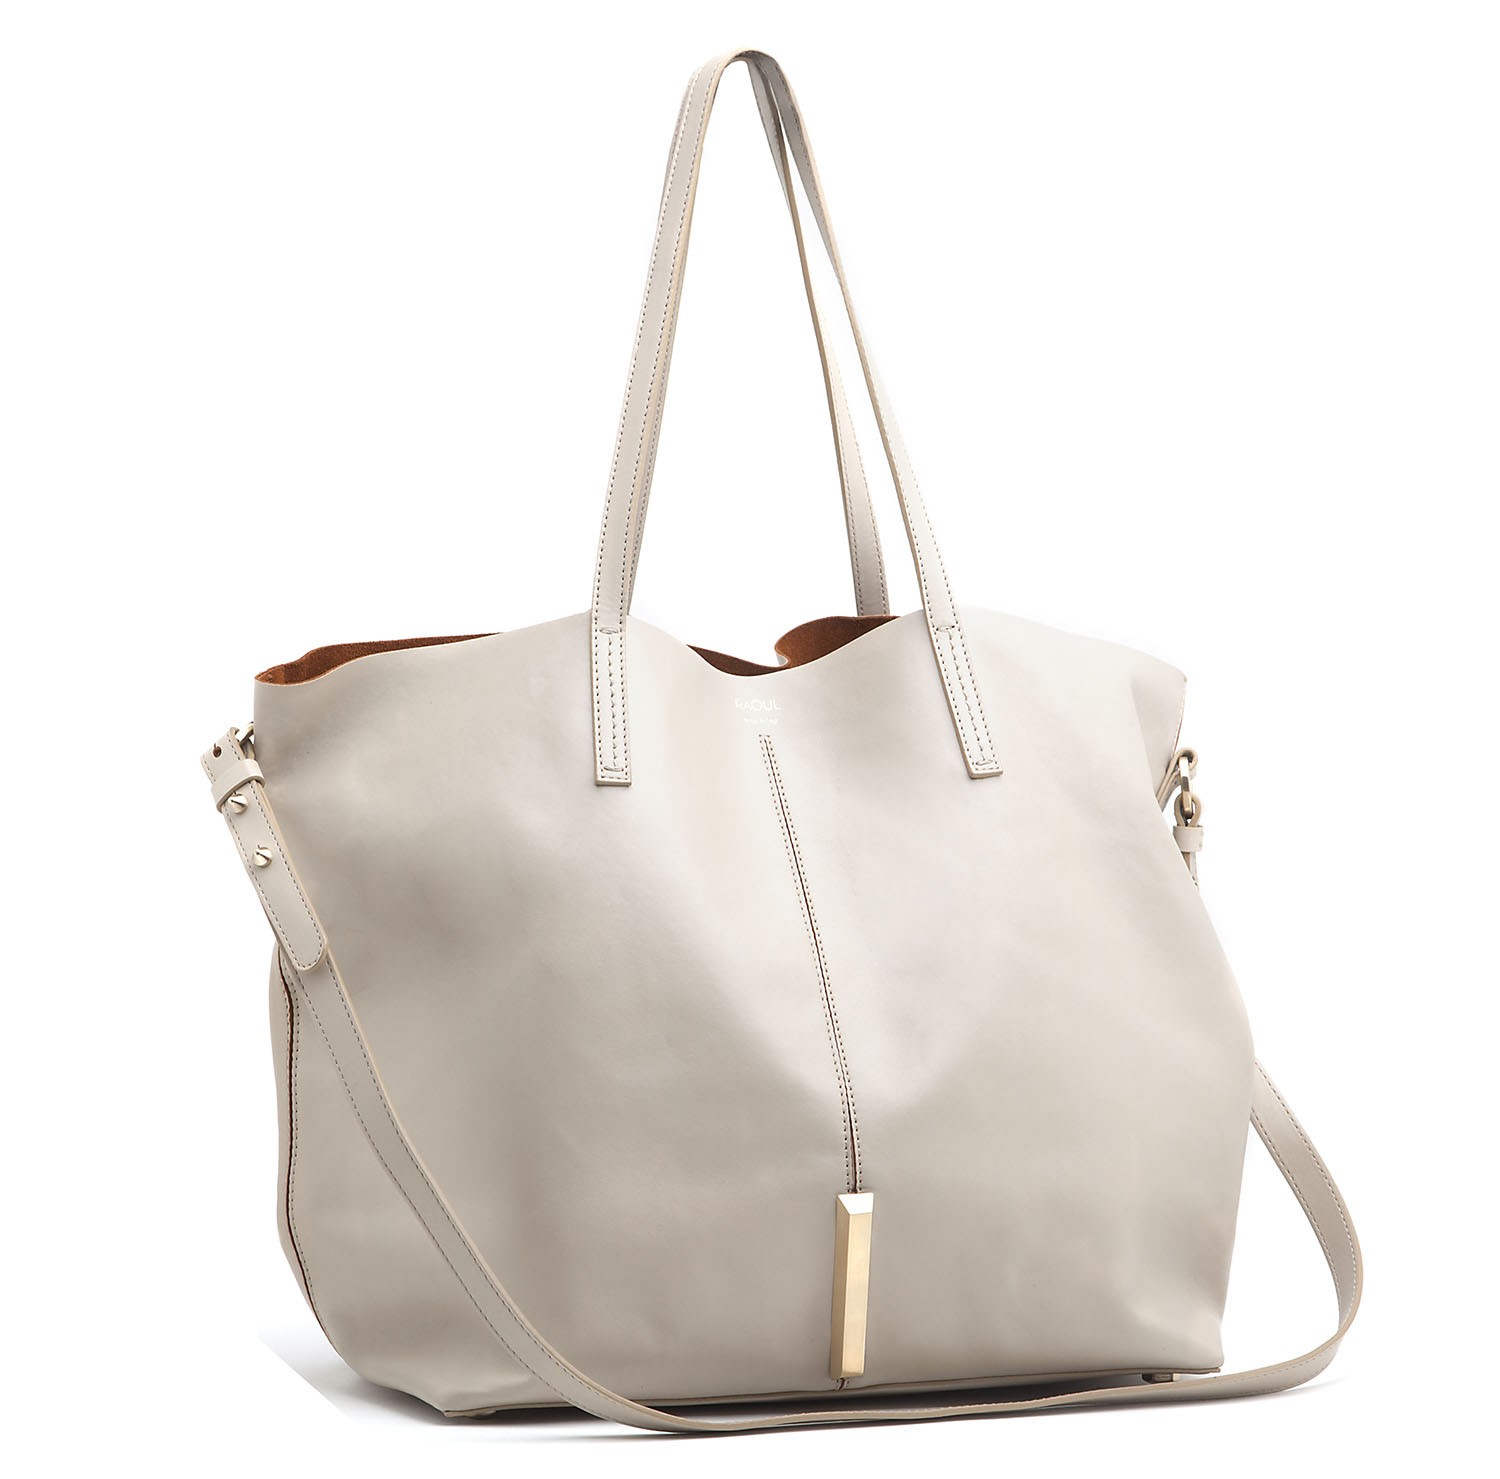 Marion Tote By Raoul Description Luxarious Everyday Tote In A Neatural